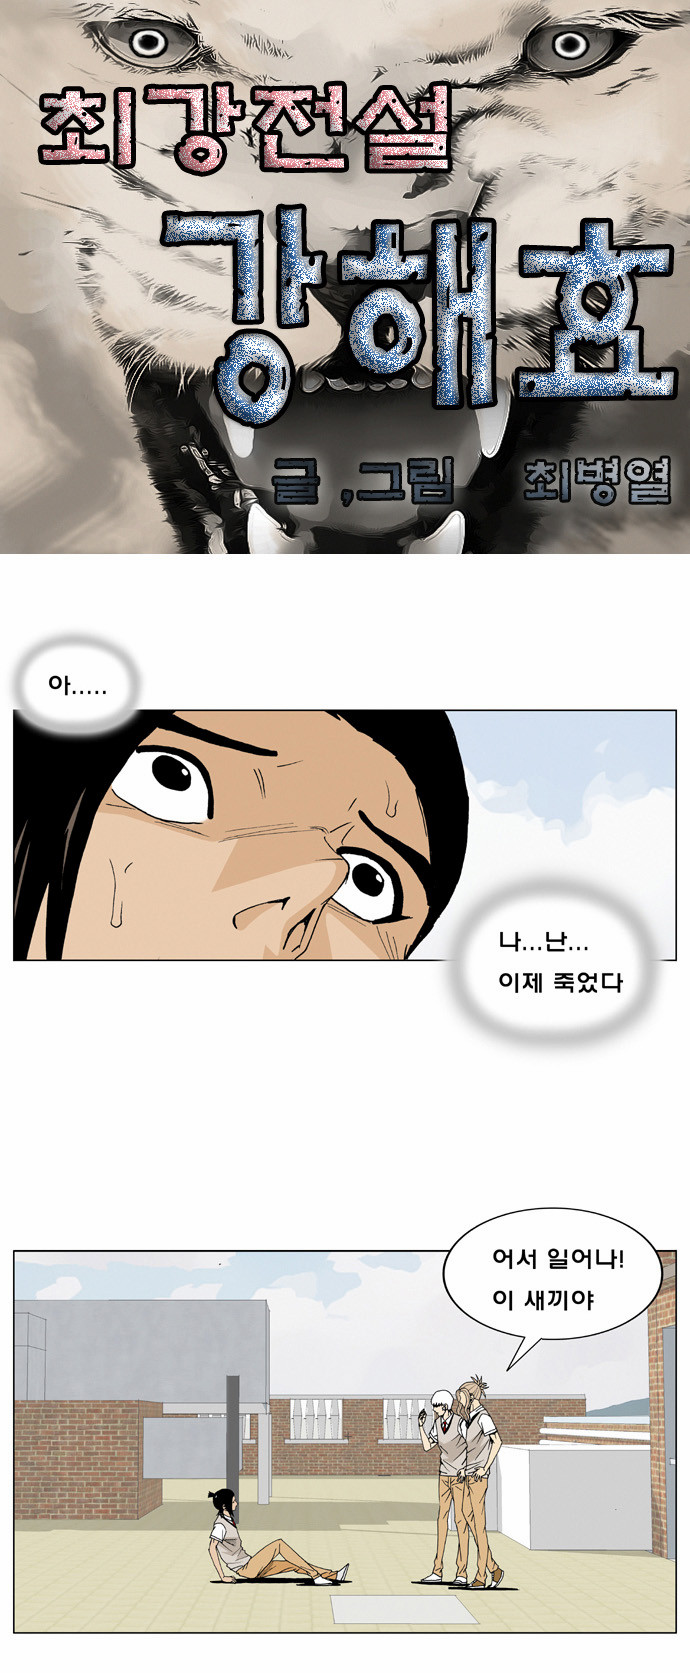 Ultimate Legend - Kang Hae Hyo - Chapter 10 - Page 3